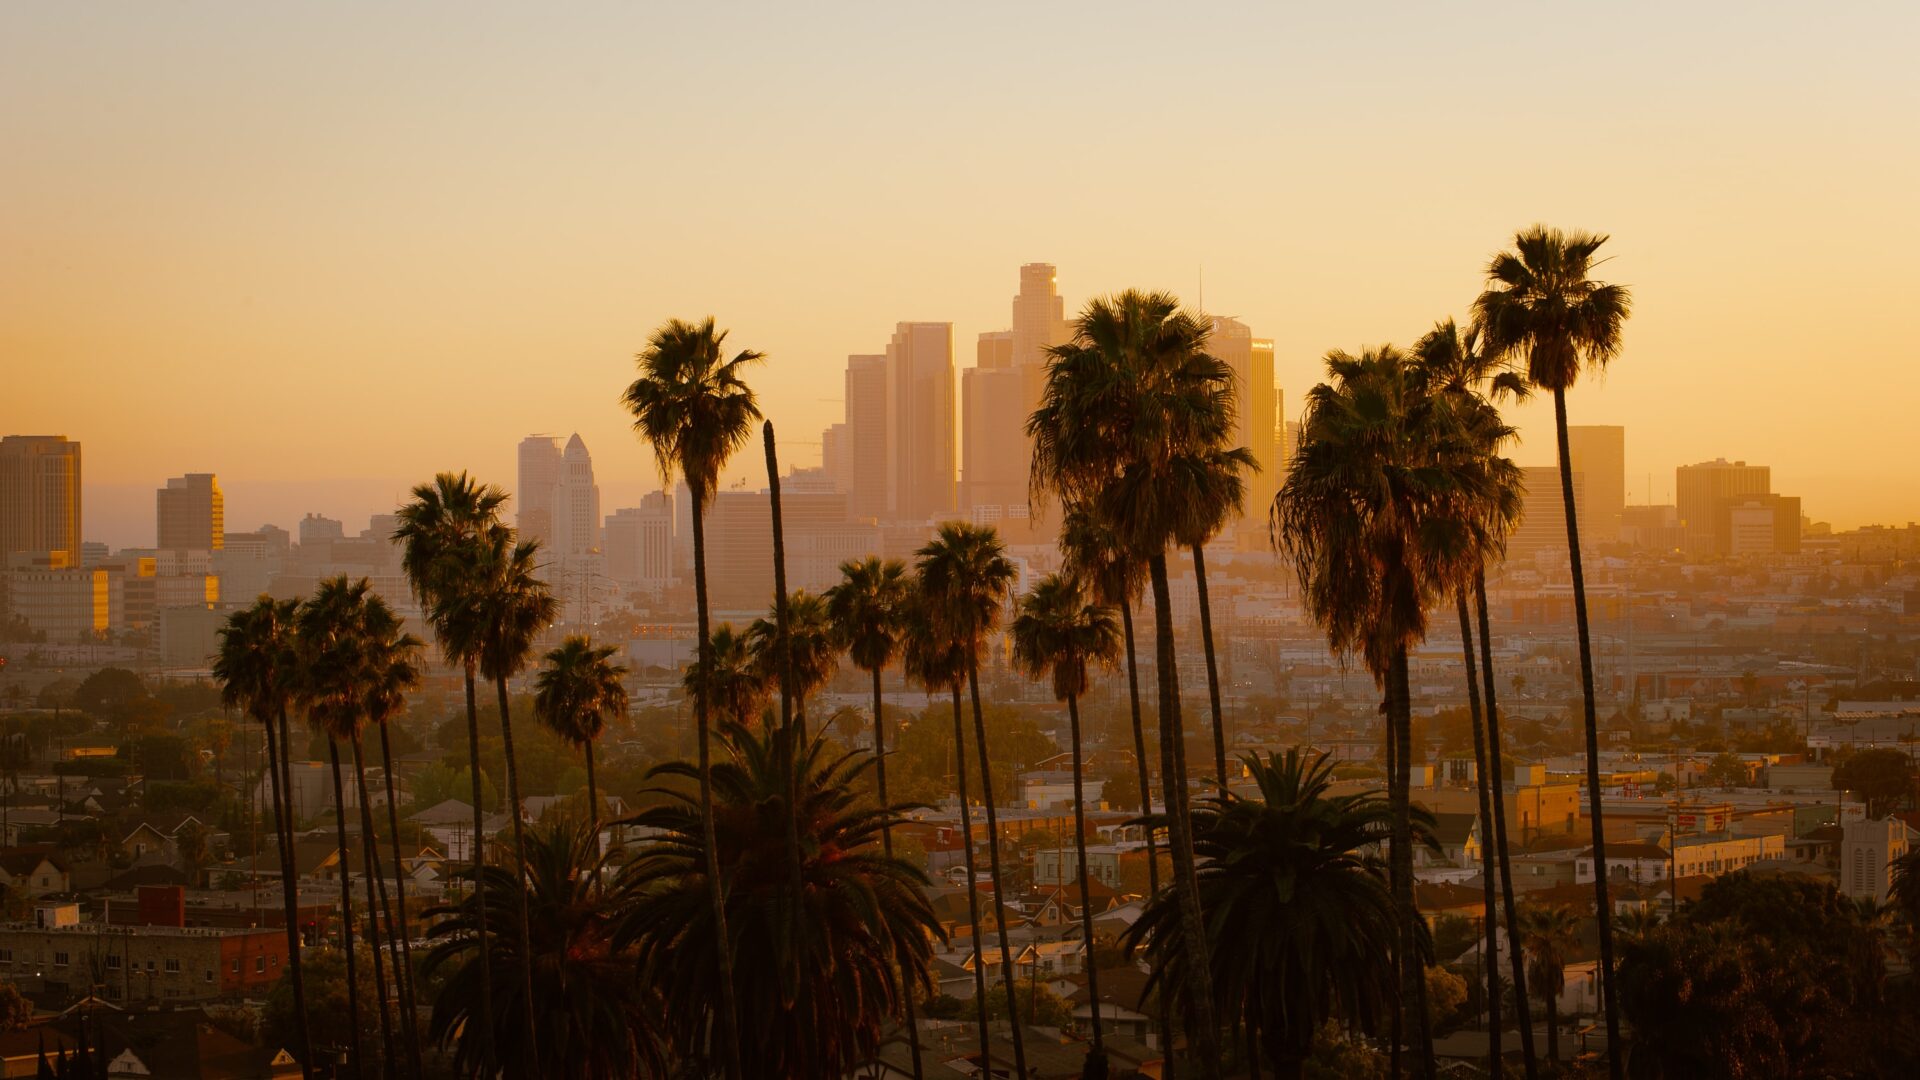 My city: Los Angeles | Overview of downtown Los Angeles with the sun setting on palm trees